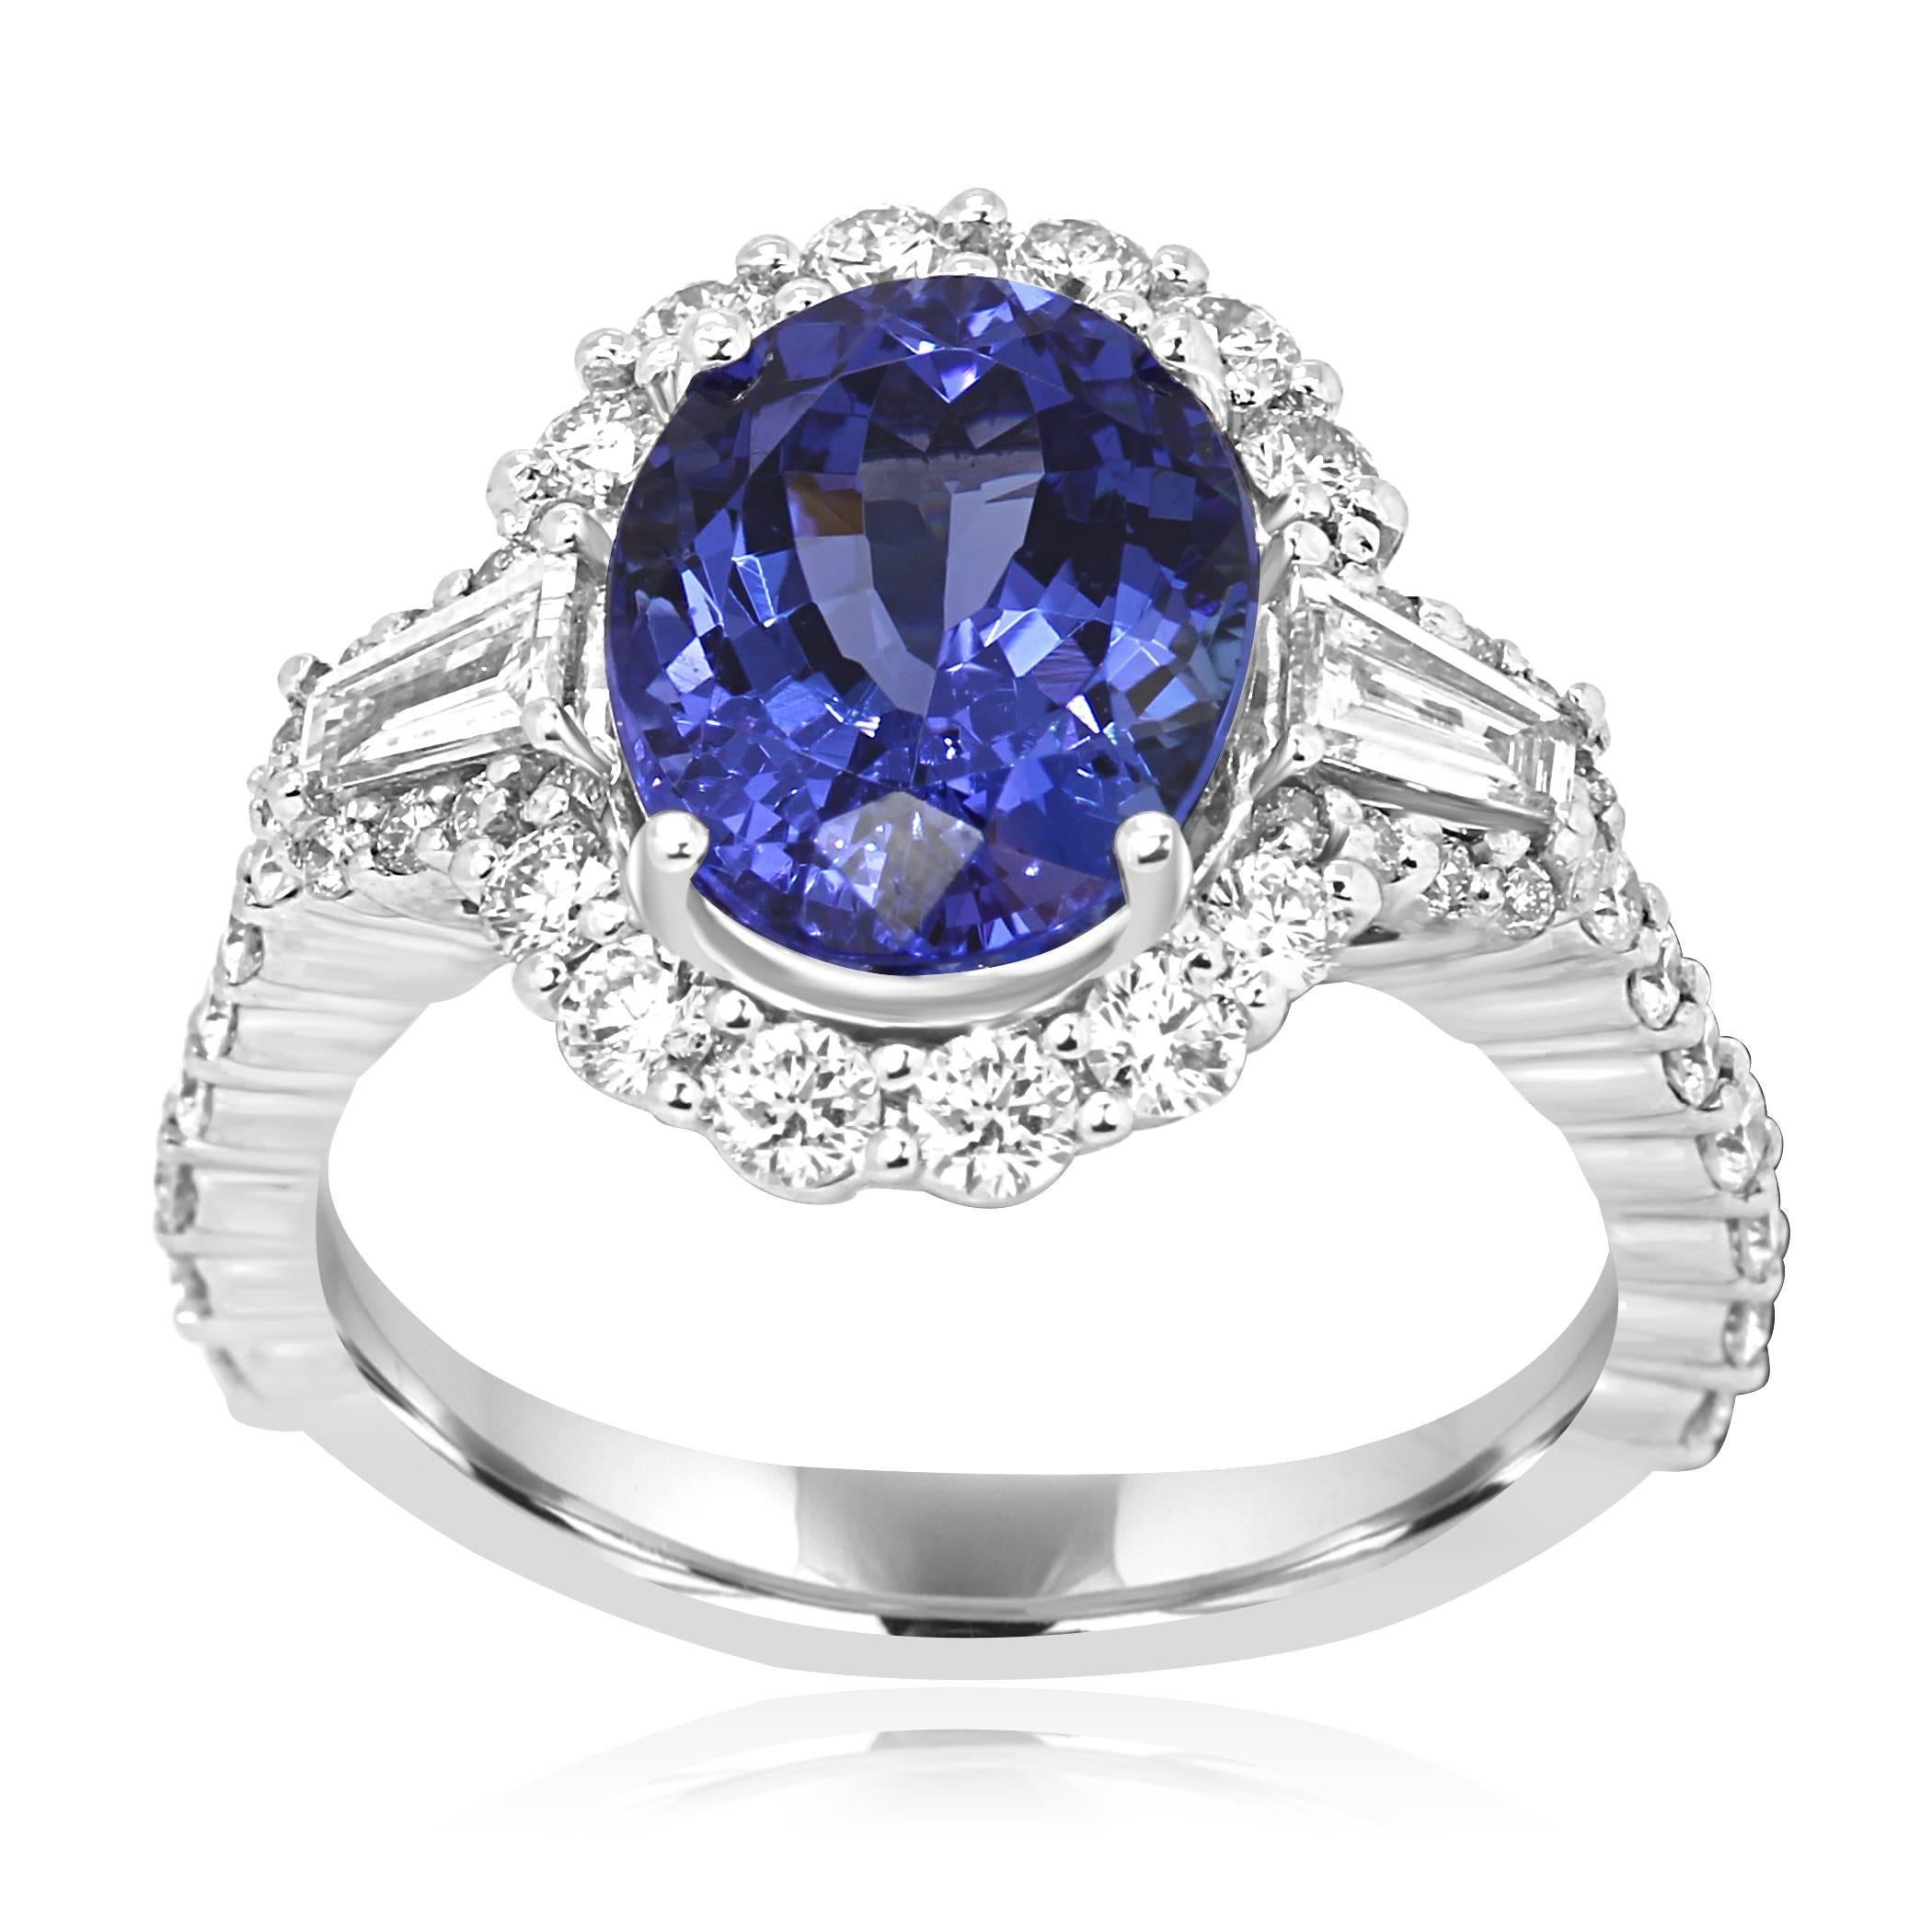 Gorgeous Tanzanite Oval 4.42 Carat encircled in a single Halo of White Round Diamonds 0.87 Carat flanked by 2 White Diamond Tapers on the side 0.31 Carat in 14K White Gold Three Stone Fashion Cocktail Ring.

Style available in different price